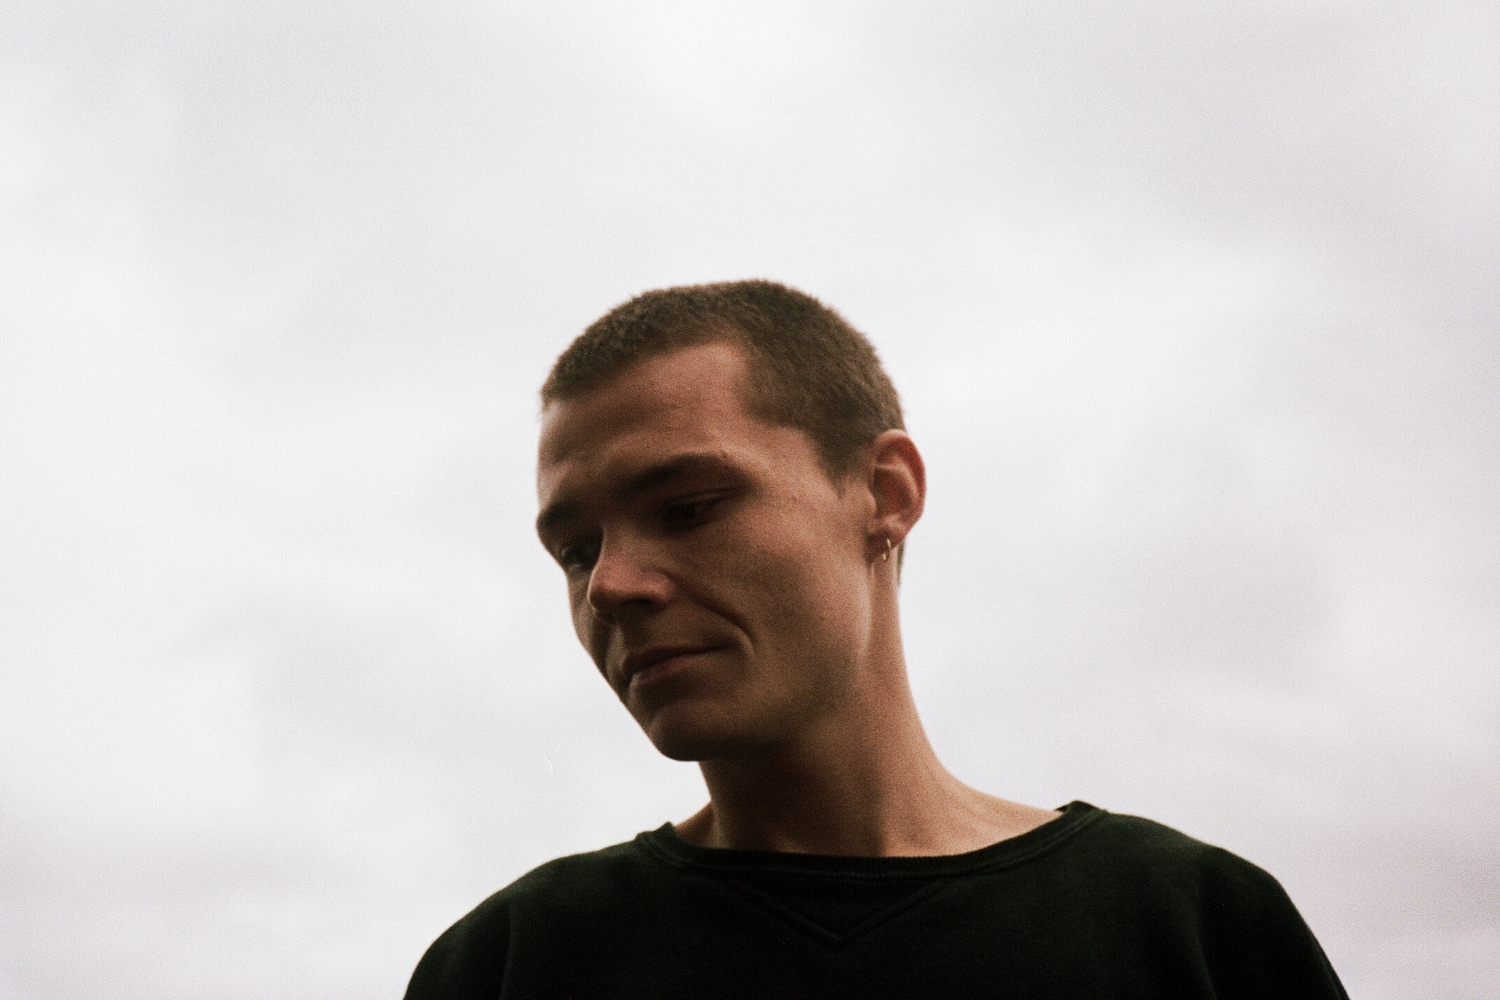 Westerman channels megalomania on new track 'Edison'